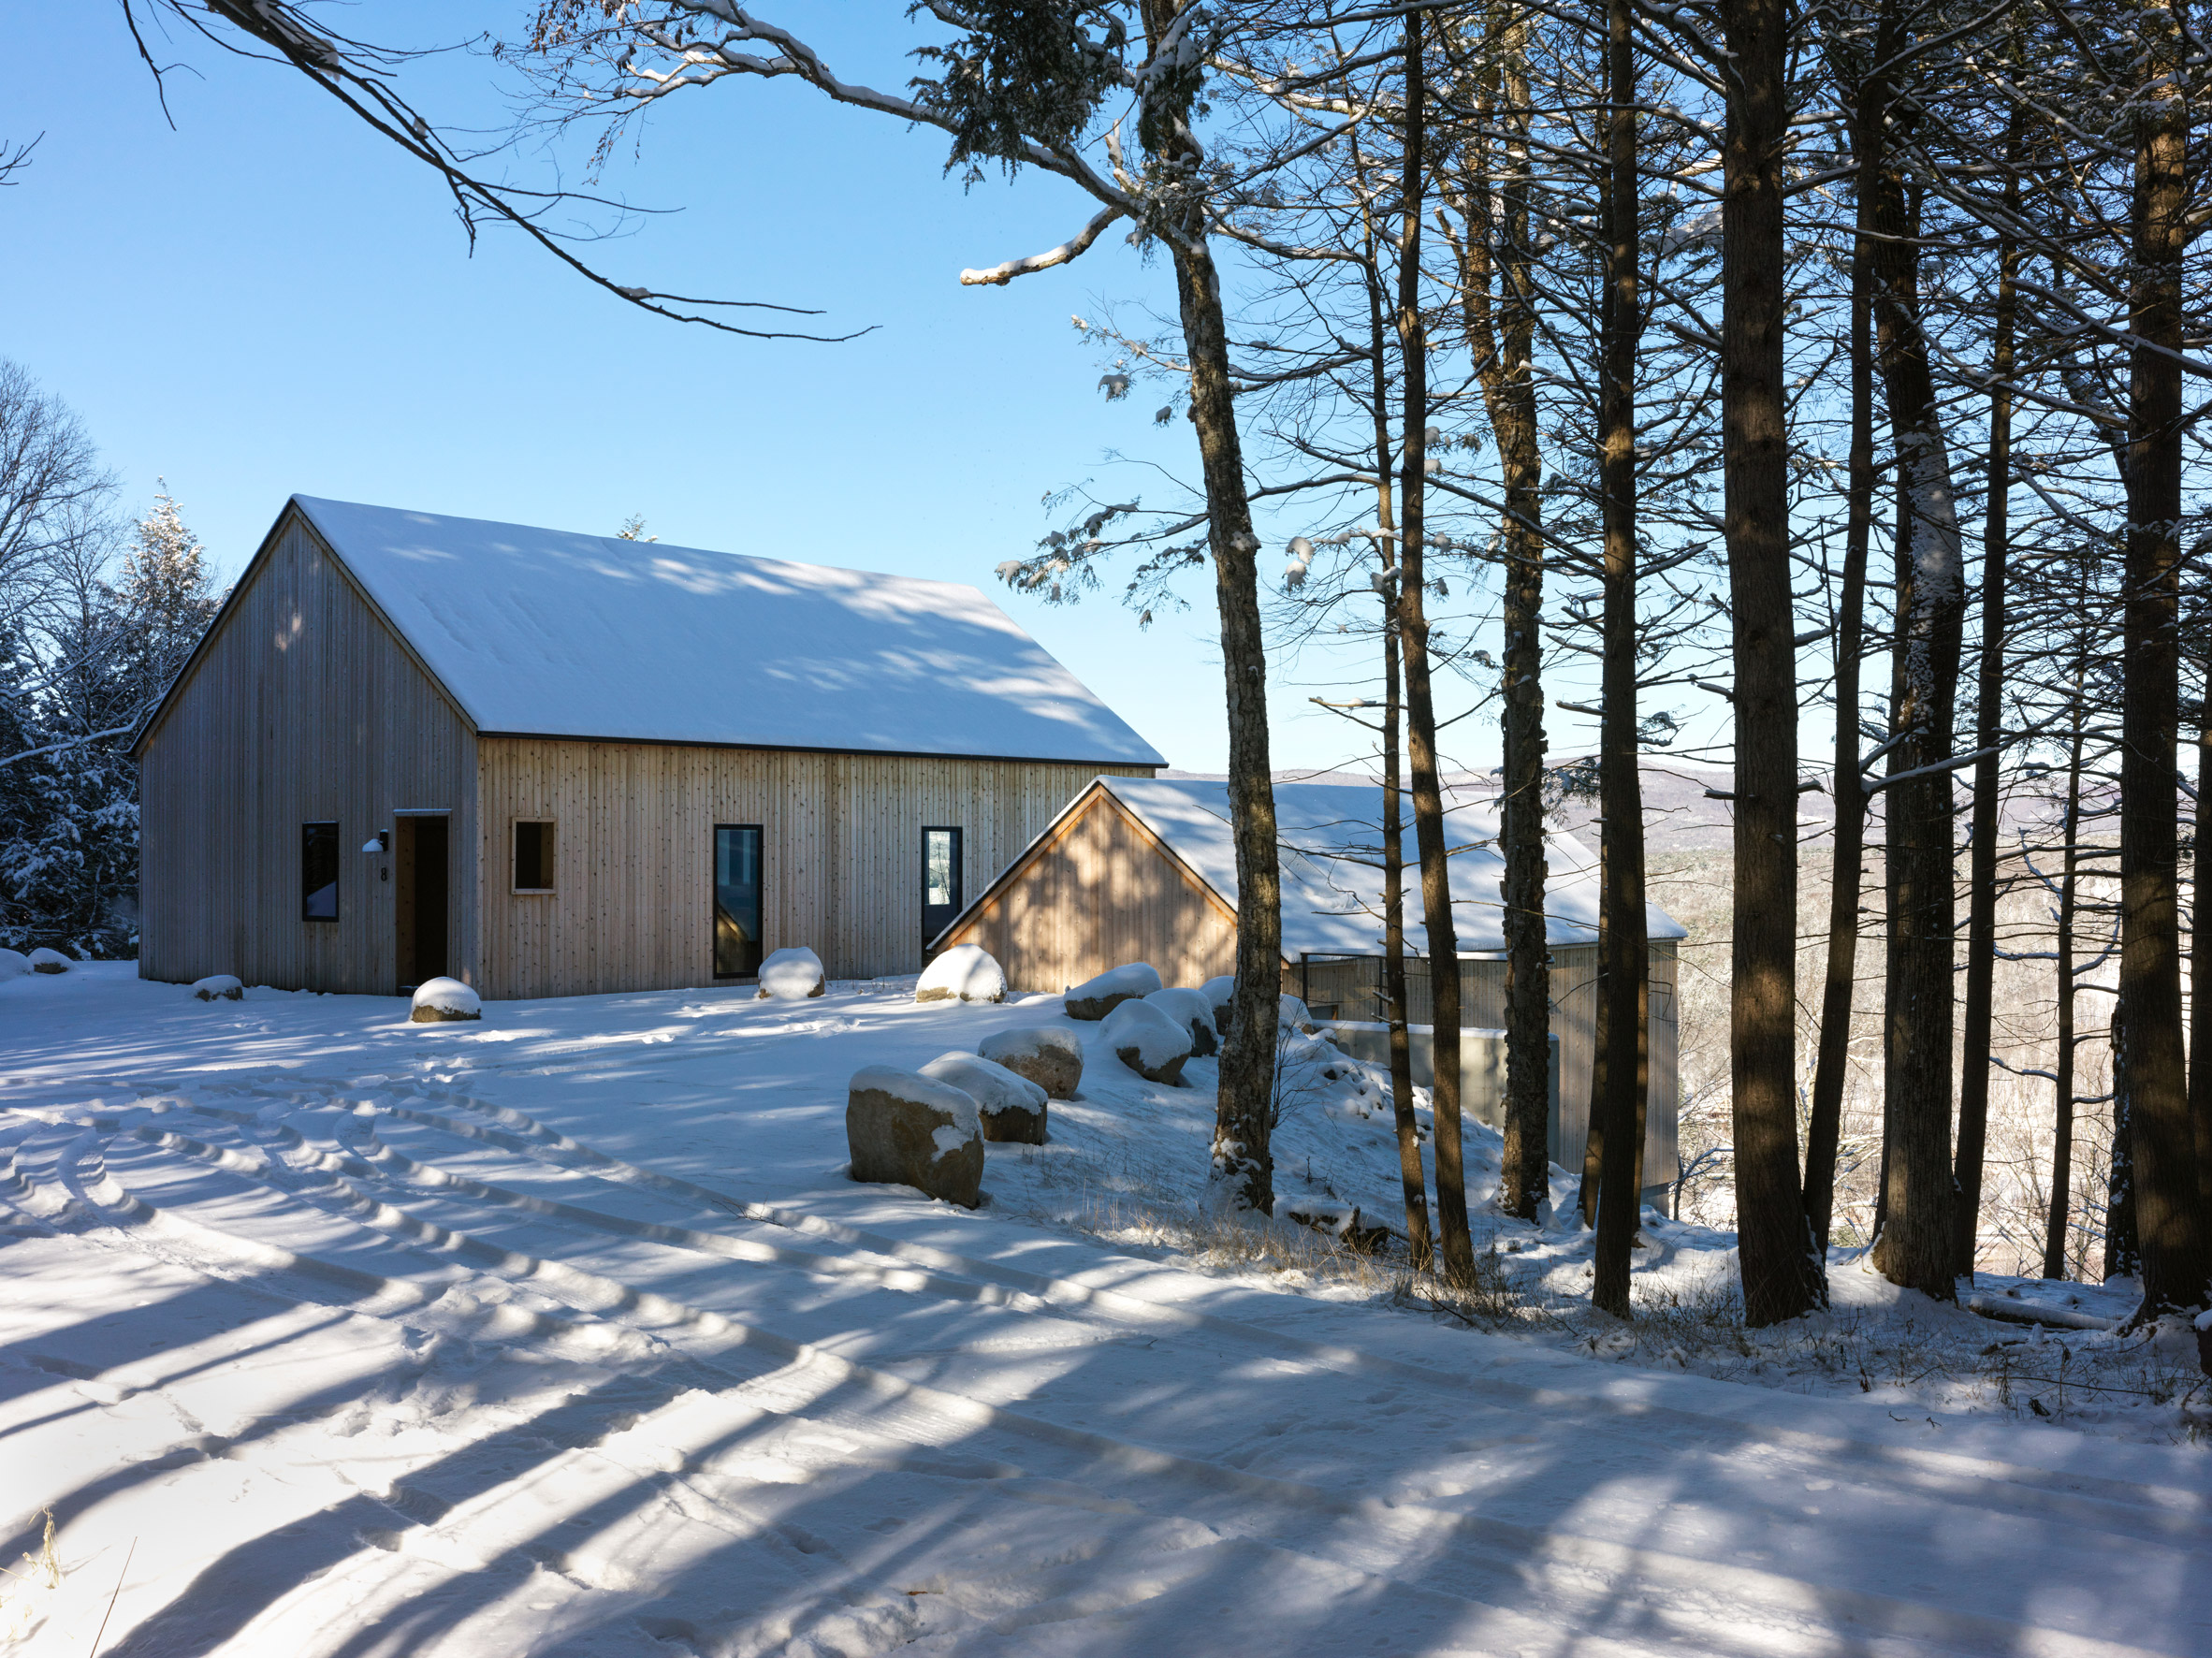 Two timber-clad pitched-roof structures on a snowy hill with trees